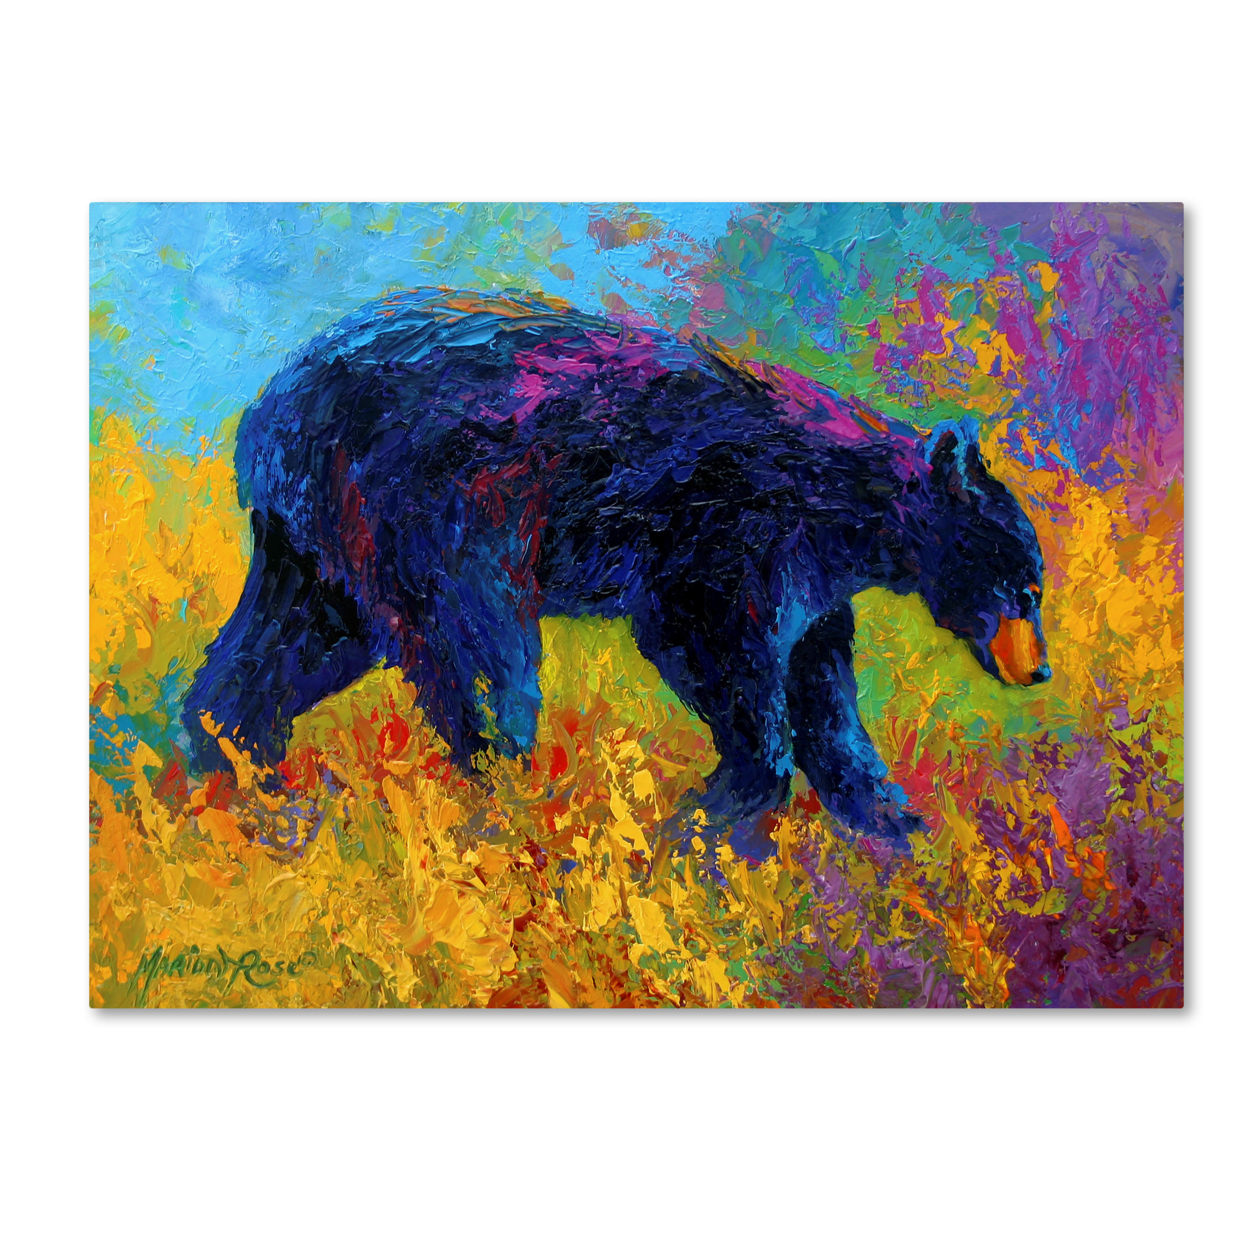 Marion Rose 'Young Restless II Black Bear Big' Ready To Hang Canvas Art 24 X 32 Inches Made In USA